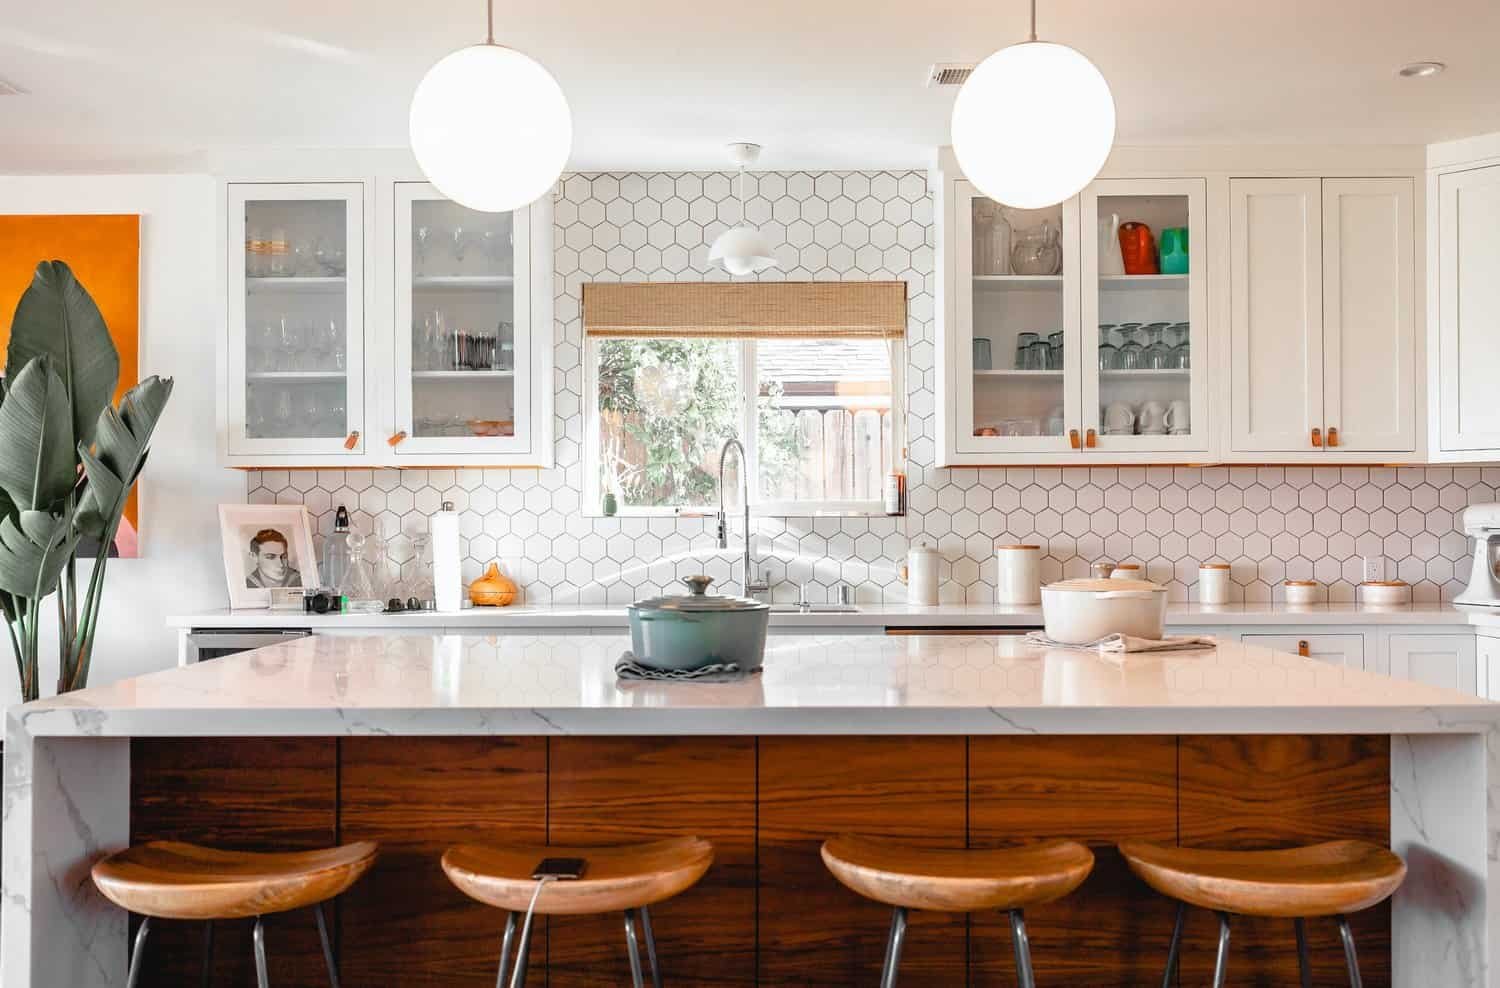 Photo of a bright, modern kitchen featuring freshly painted white cabinets with glass fronts. The cabinets contrast beautifully with the hexagonal tile backsplash and marble countertops. A large kitchen island with wooden stools and decorative items completes the stylish look.